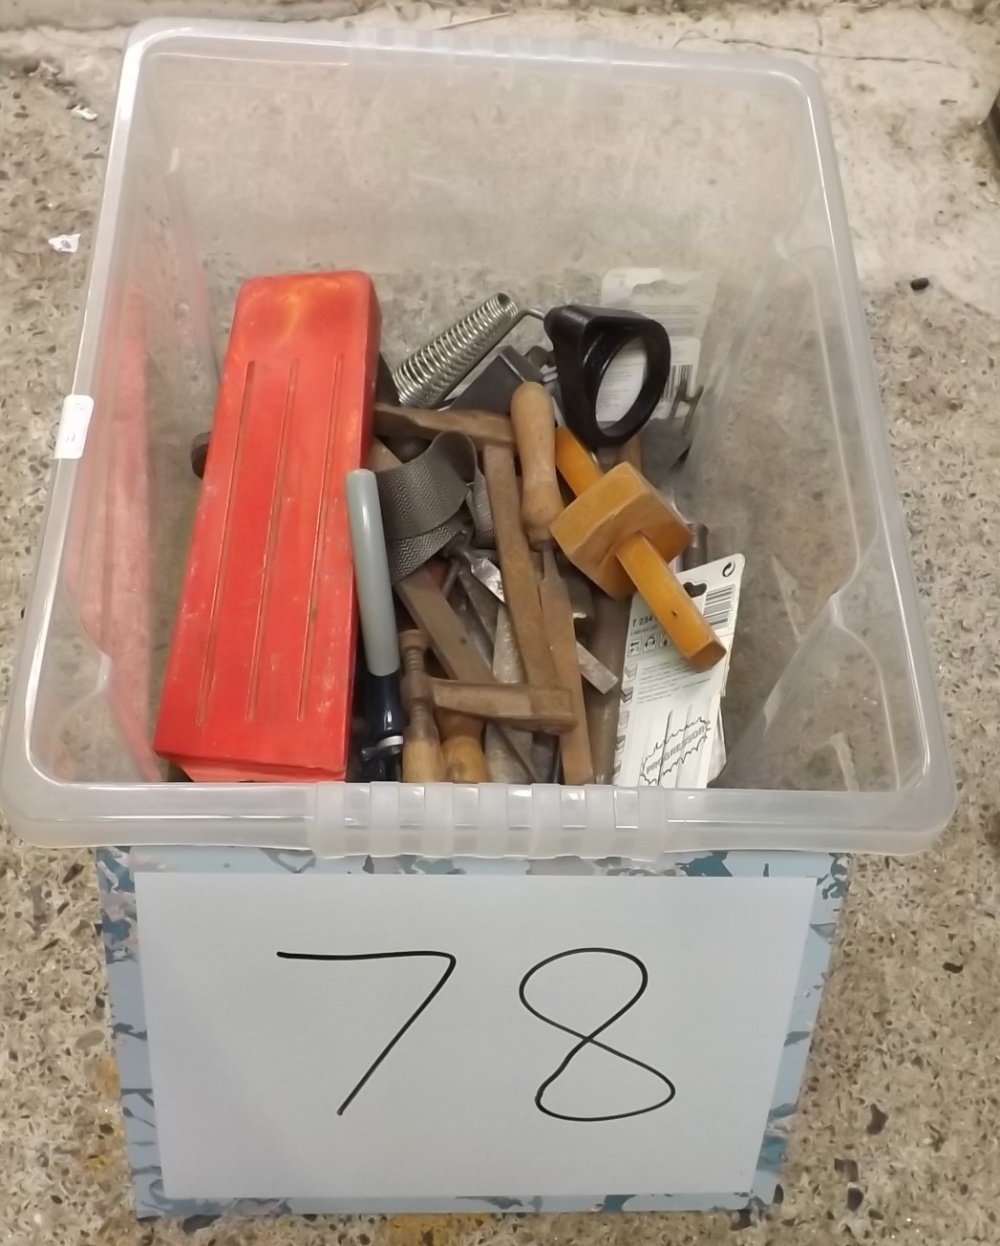 CARTON OF TOOLS, WOOD CHISELS, CLAMP, FILES, PUNCHES ETC